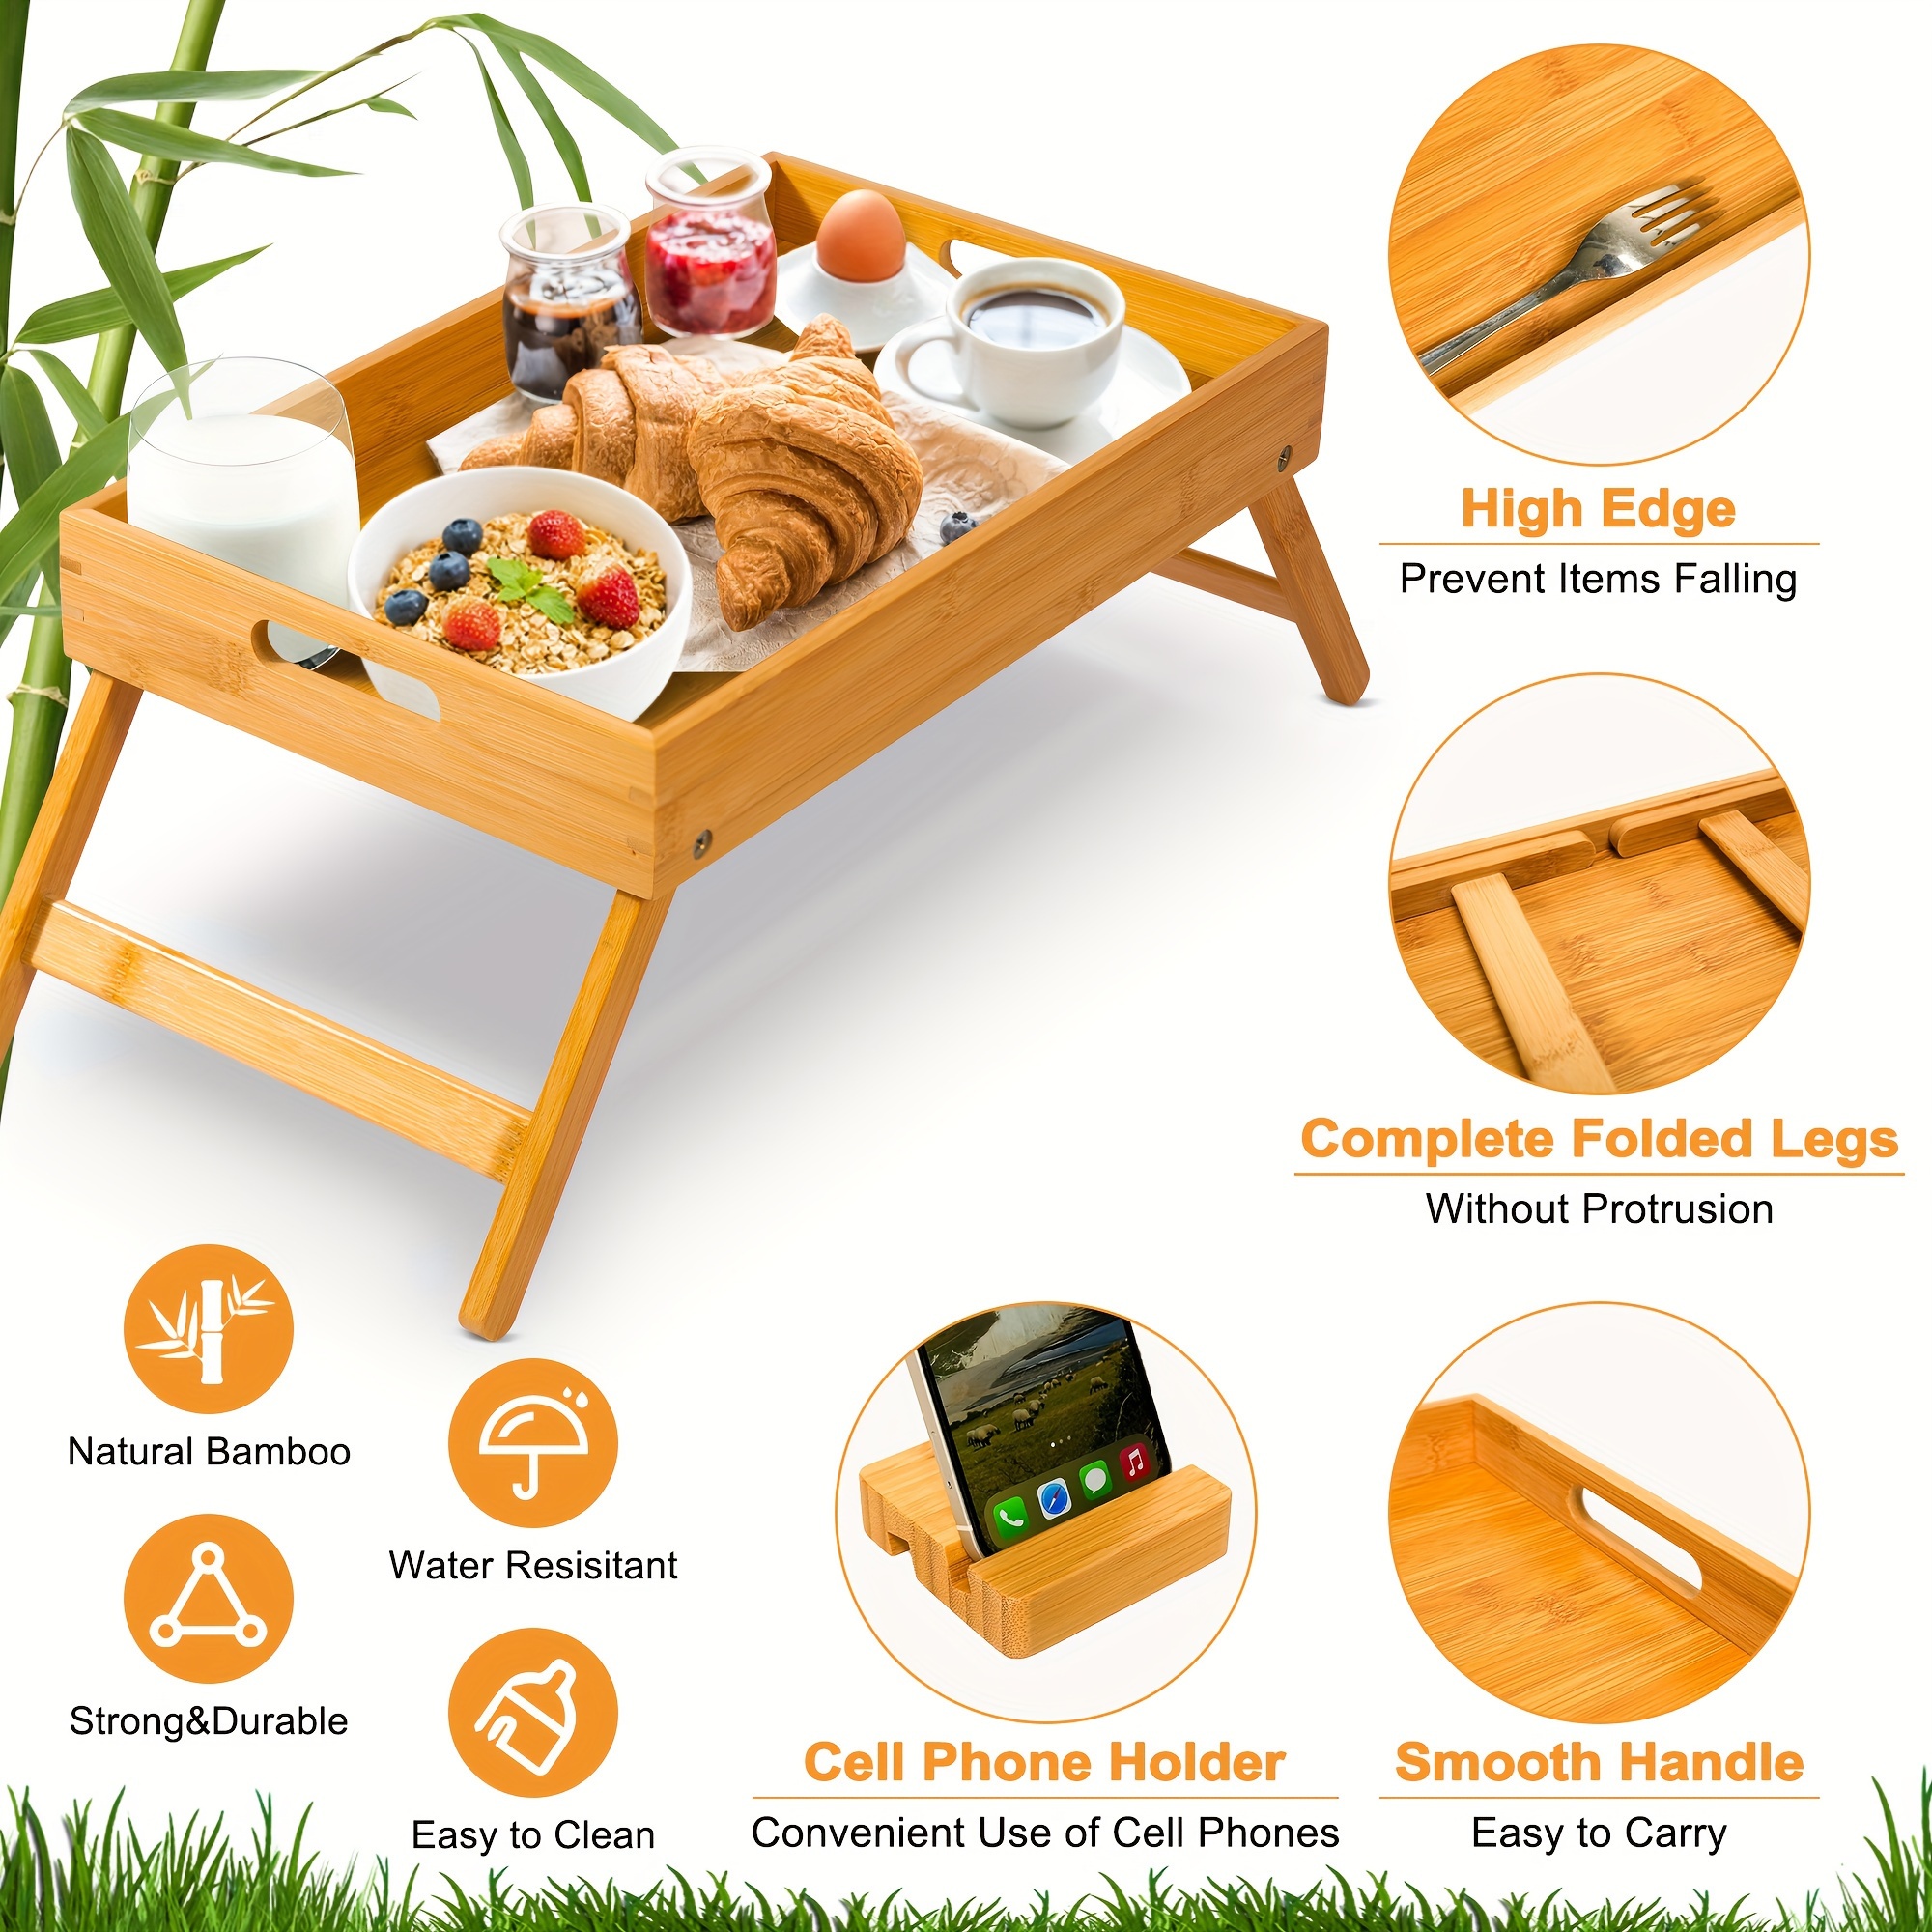 1pc Bamboo Lap Tray, Folding Legs, Carrying Handles, Holds Breakfast,  Meals, Laptop, Bed, Sofa, Outdoor, Table For Serving, Eating, Working